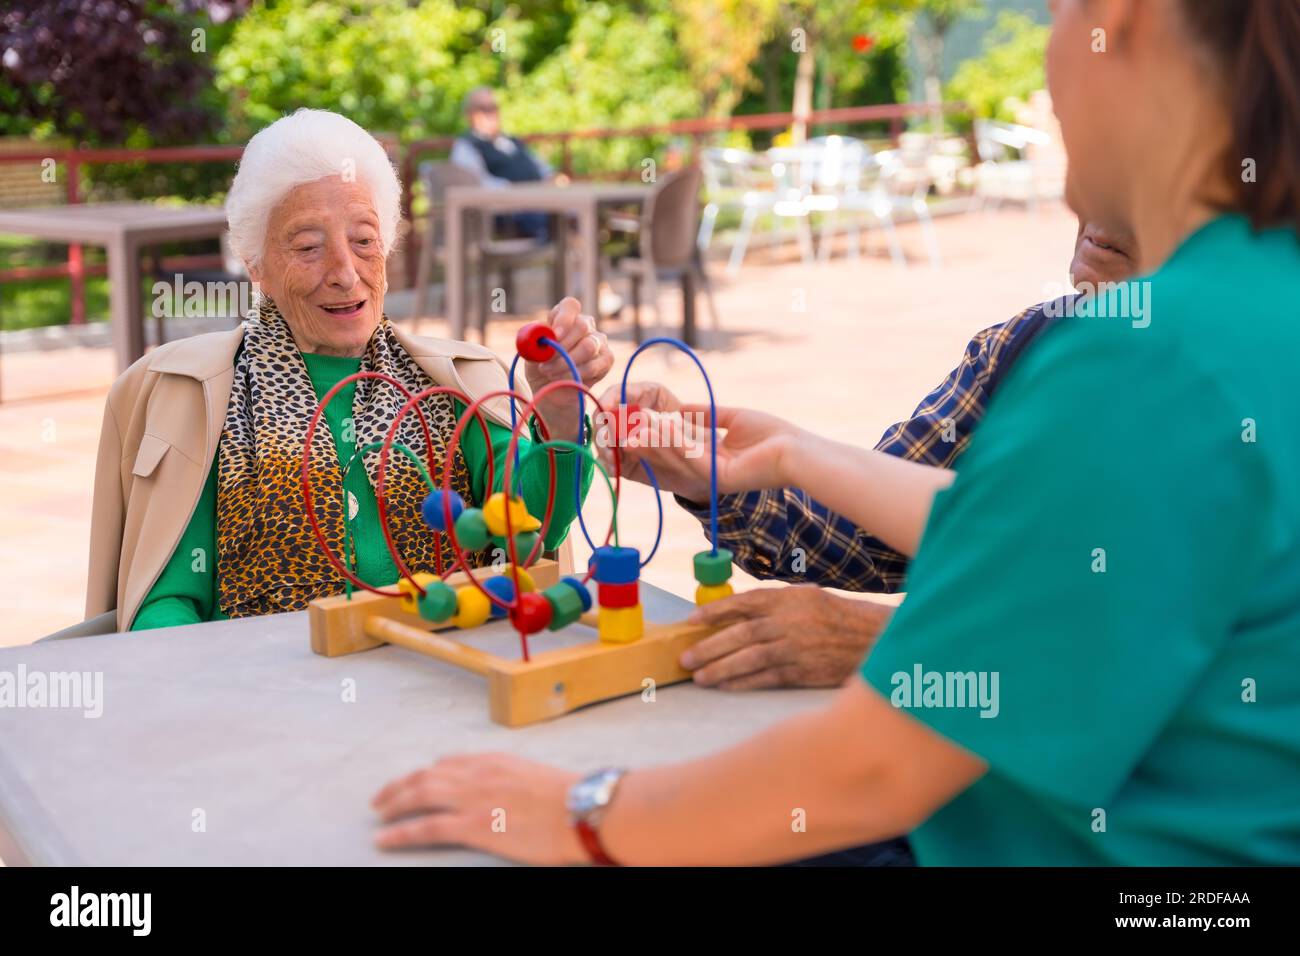 Two elderly people in the garden of a nursing home or retirement home playing with games to improve mobility Stock Photo